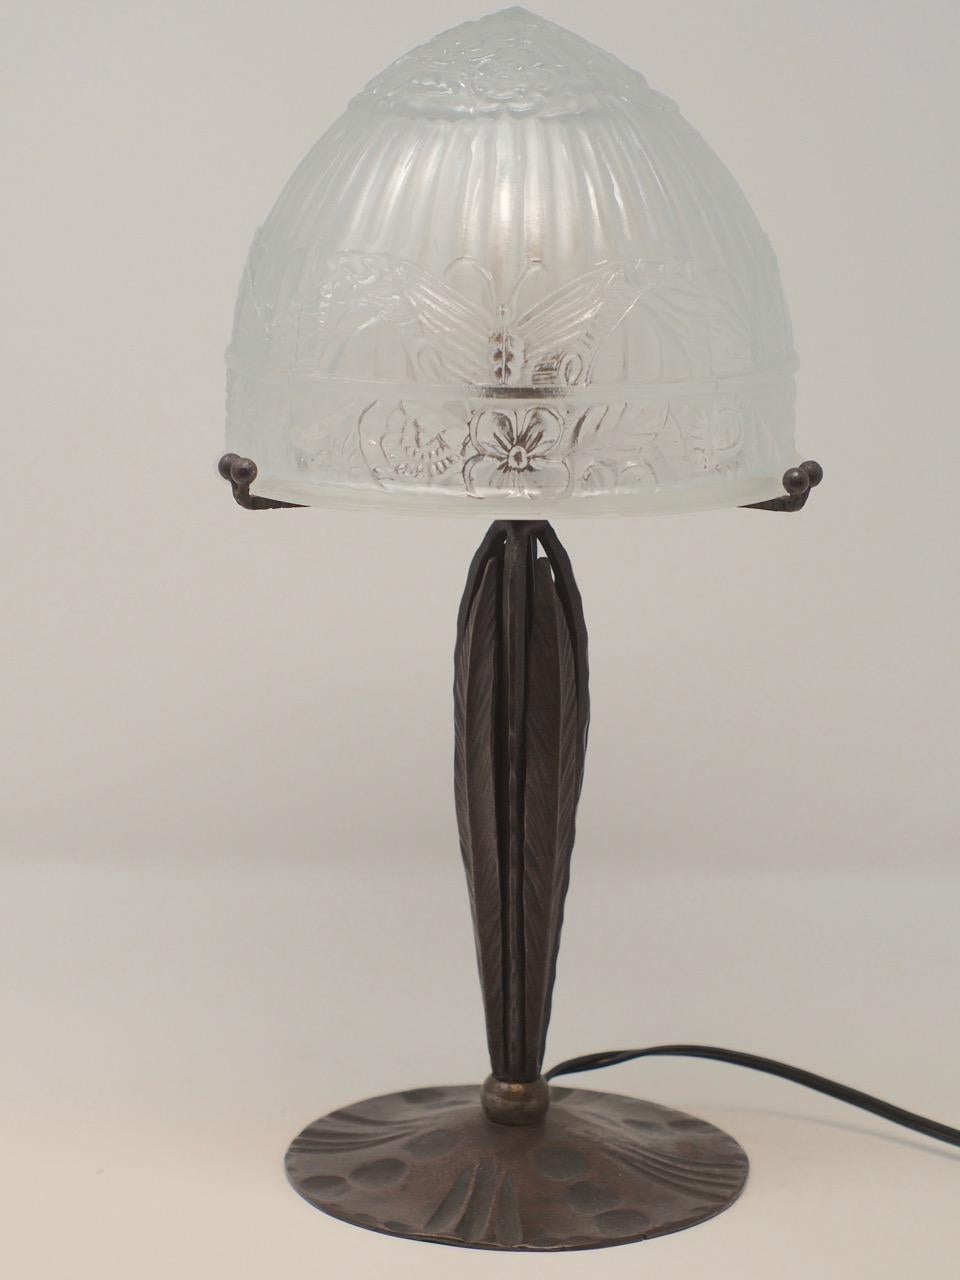 Classic French Art Deco hand forged iron table lamp with molded glass shade. 7